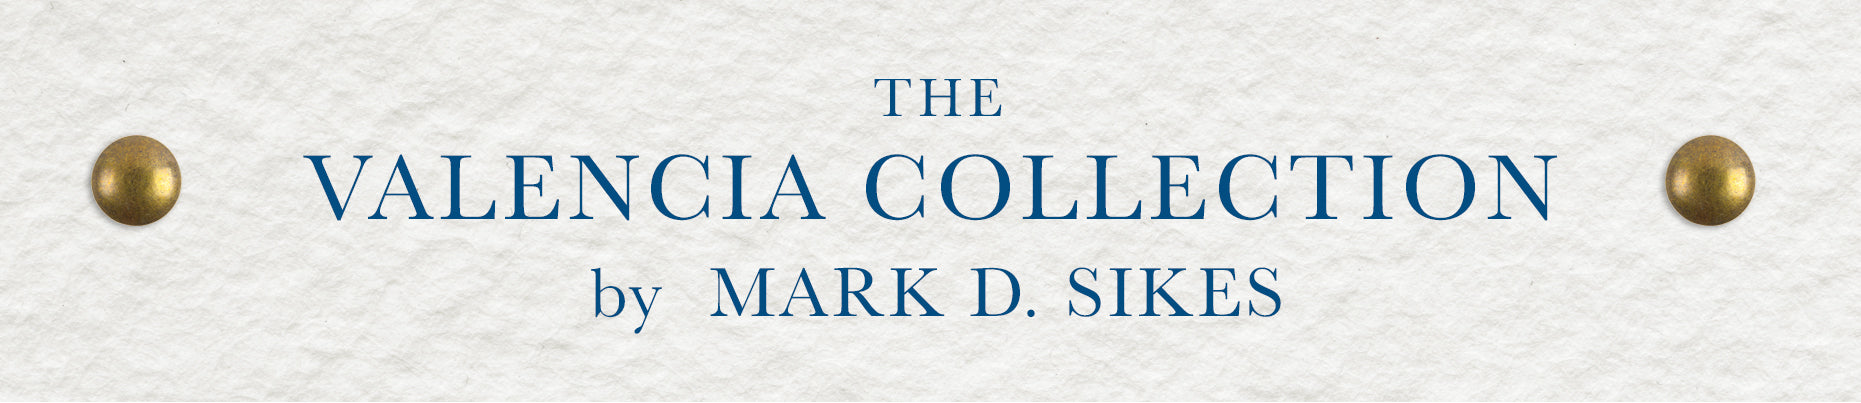 The Valencia Collection by Mark D. Sikes